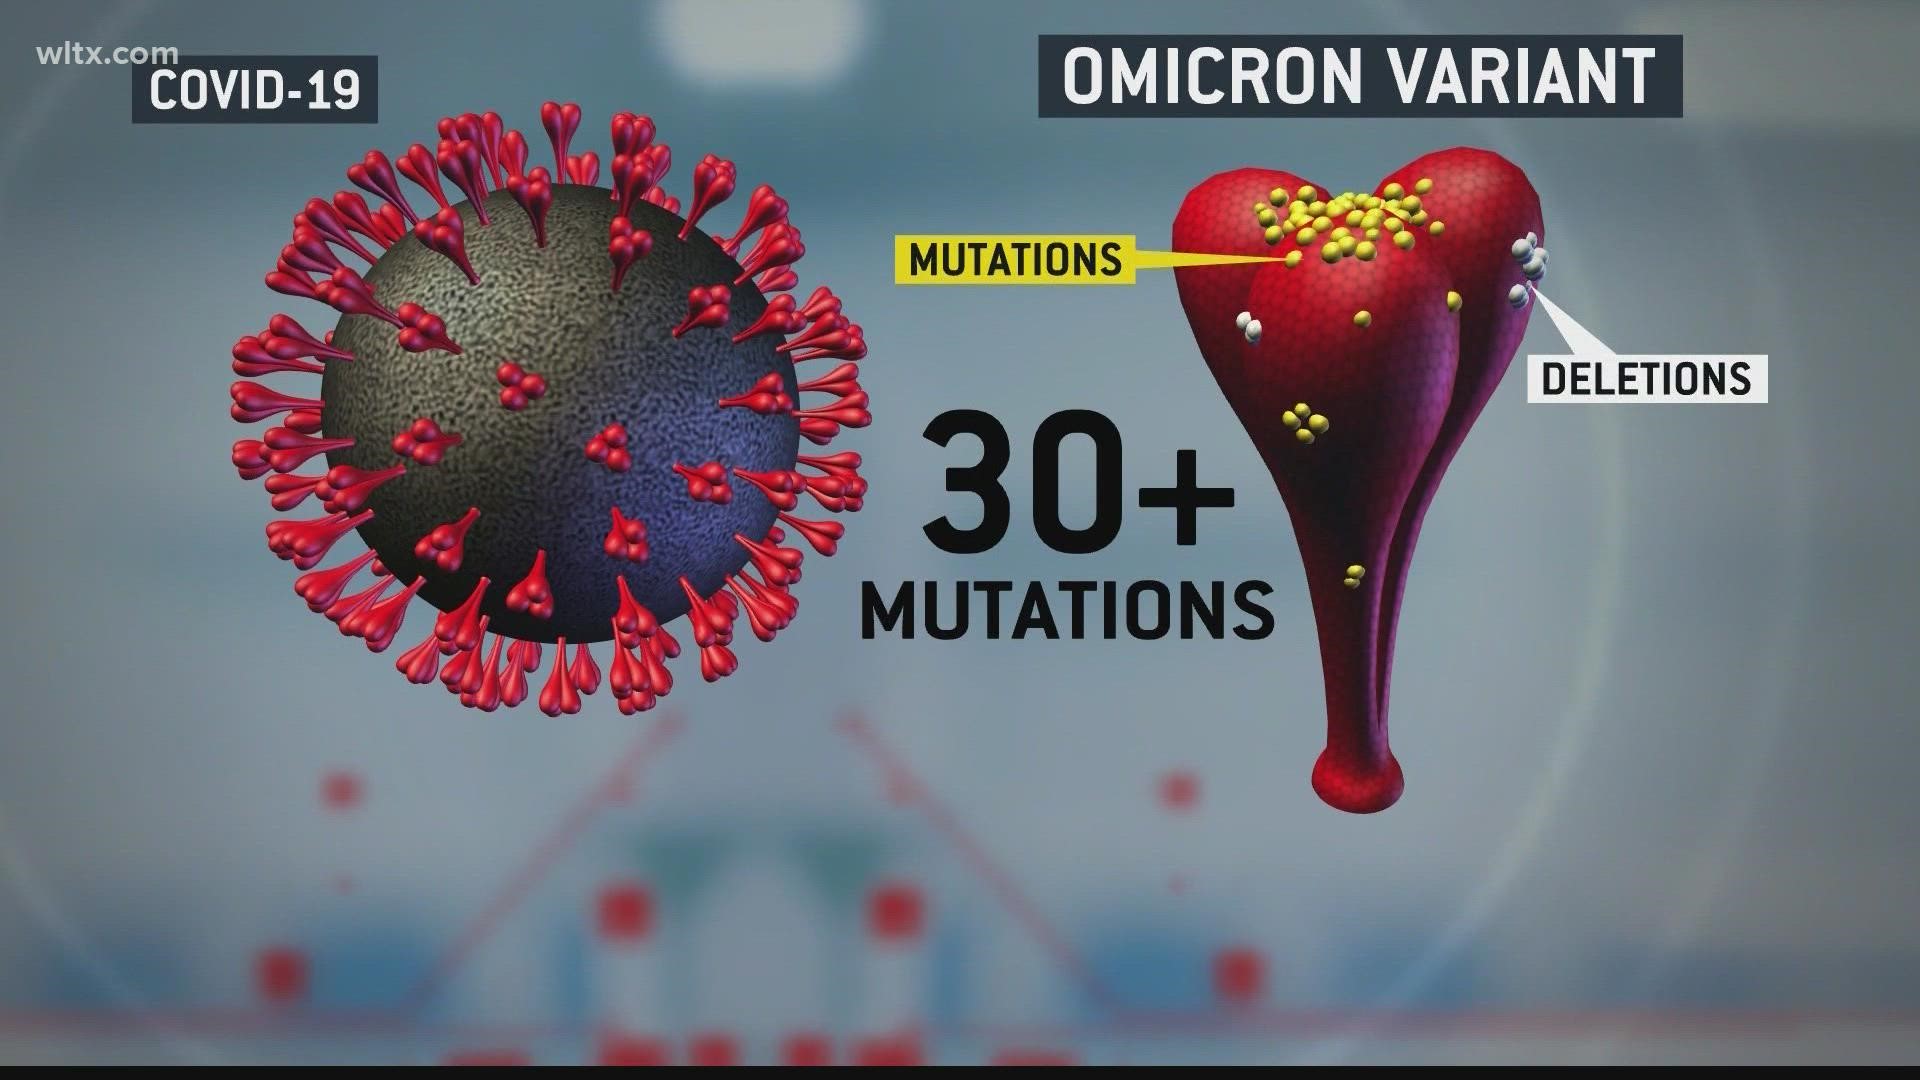 There is growing concern over COVID-19 variant B.1.1.529, also known as the Omicron variant.